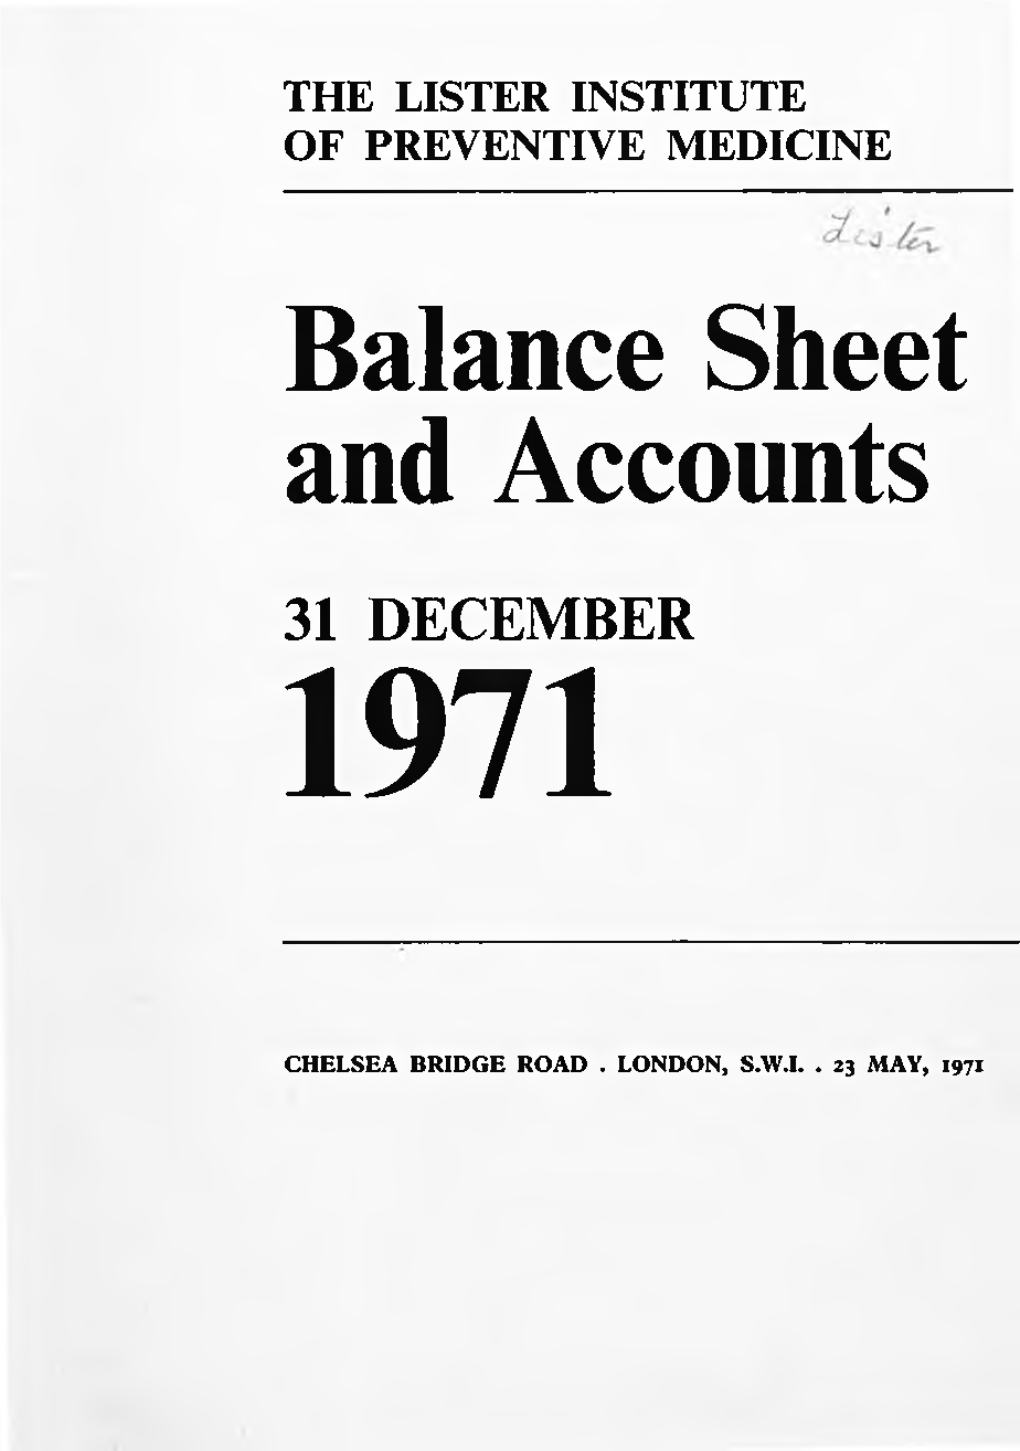 1971 to 1980 Lister Annual Report and Accounts